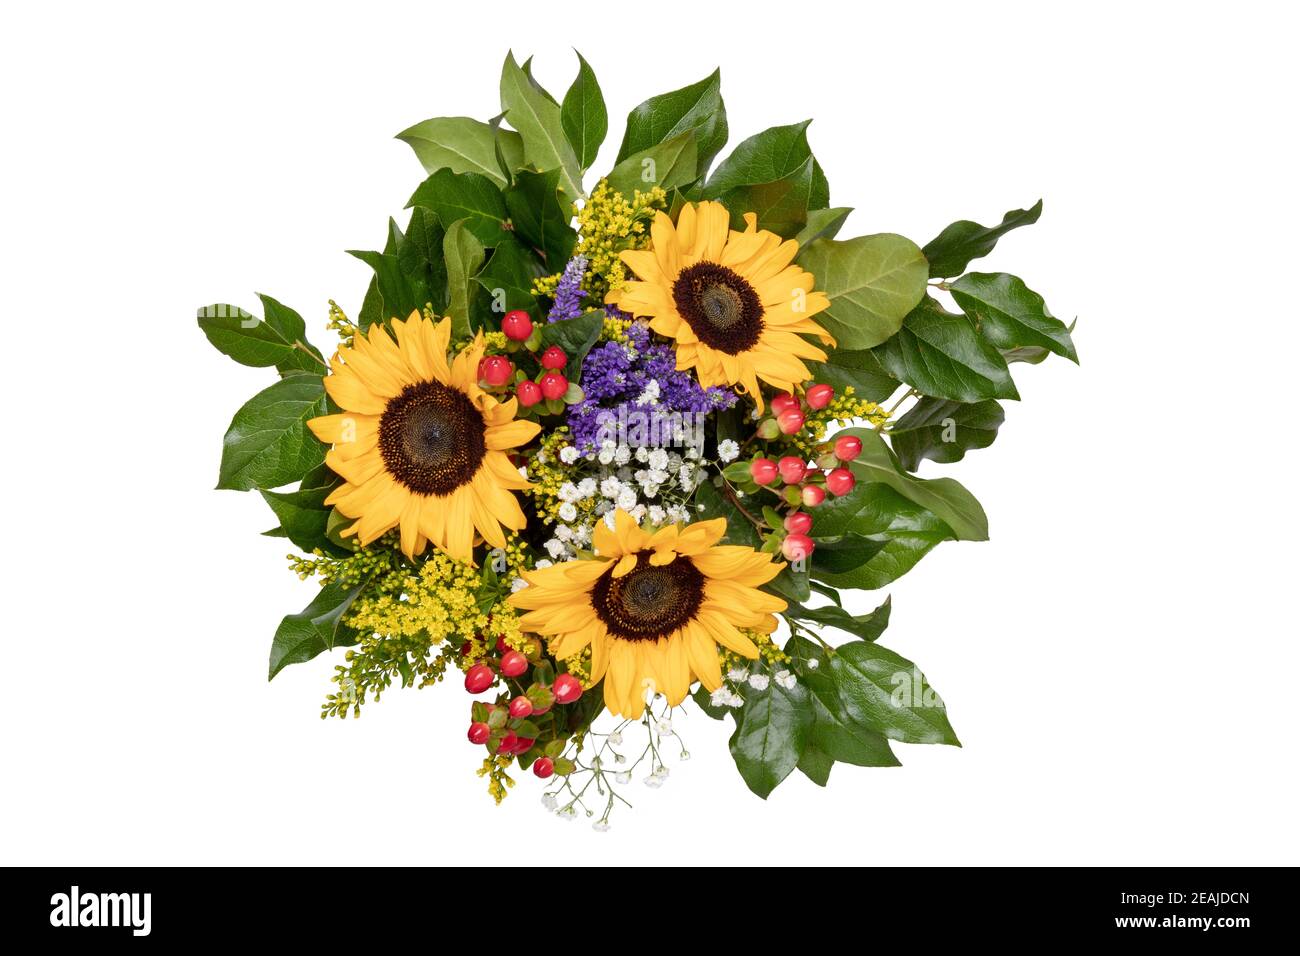 Flower bouquet isolated. Bouquet of beautiful fresh sunflowers top view isolated on a white background. Flower decorations design element. Birthday, Mother day and other festivals. Stock Photo